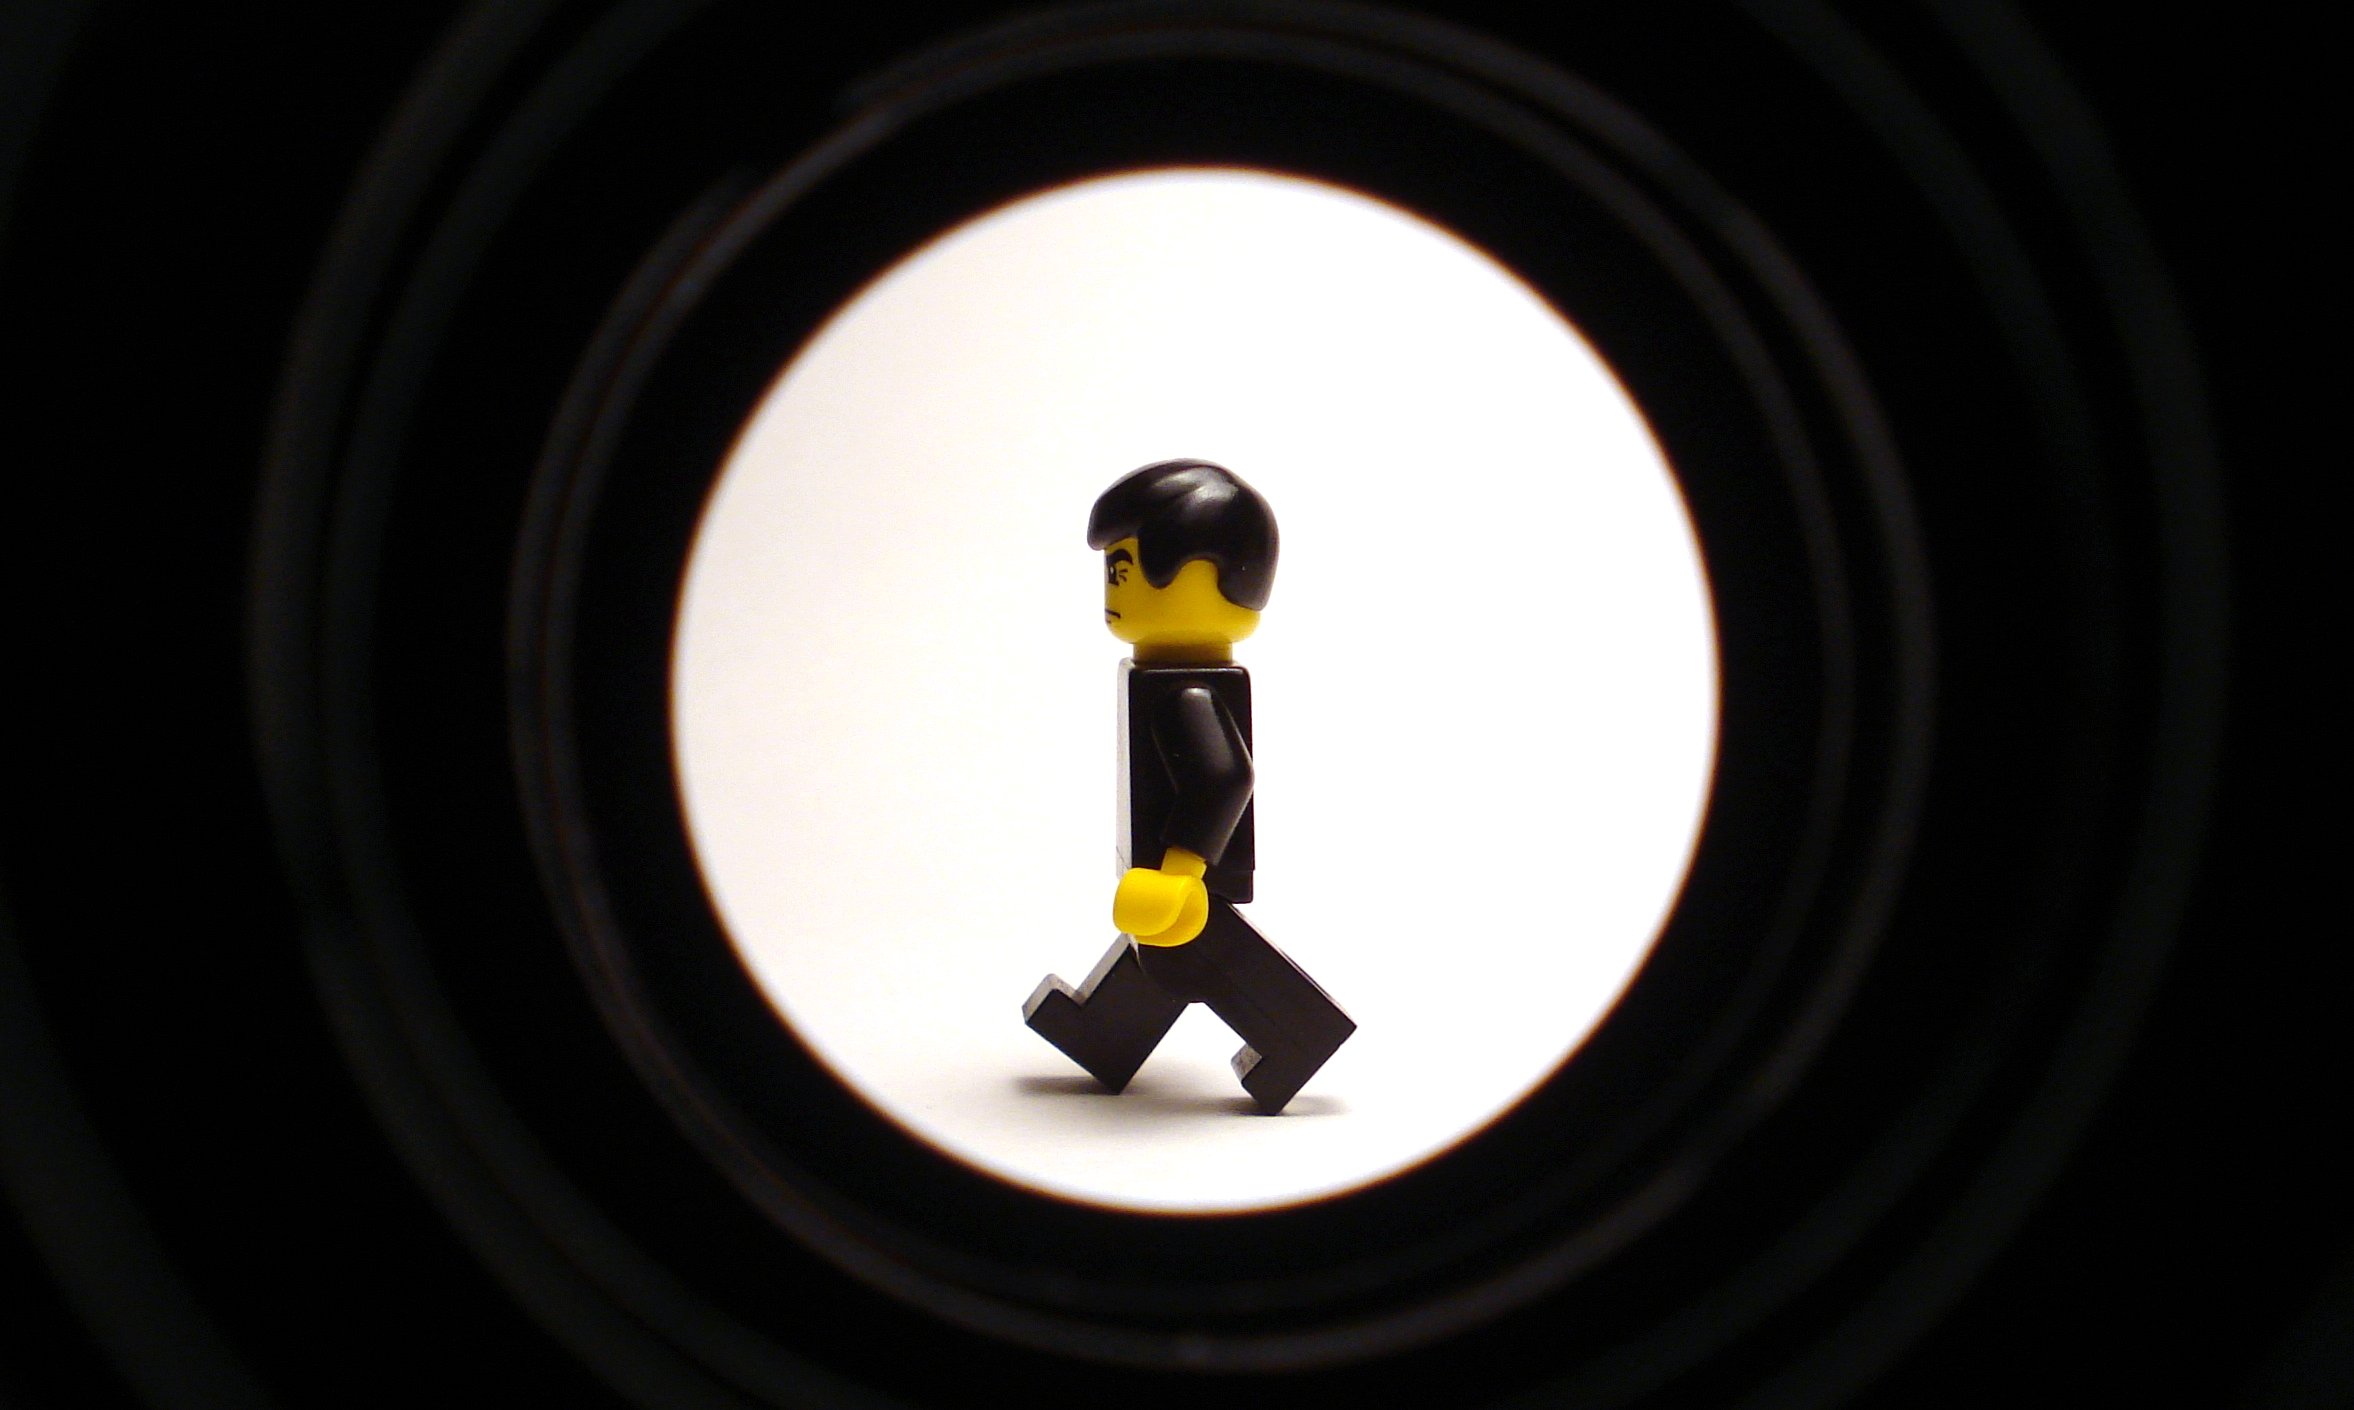 Can You Name These Movies from Their LEGO Scenes? 18 james bond